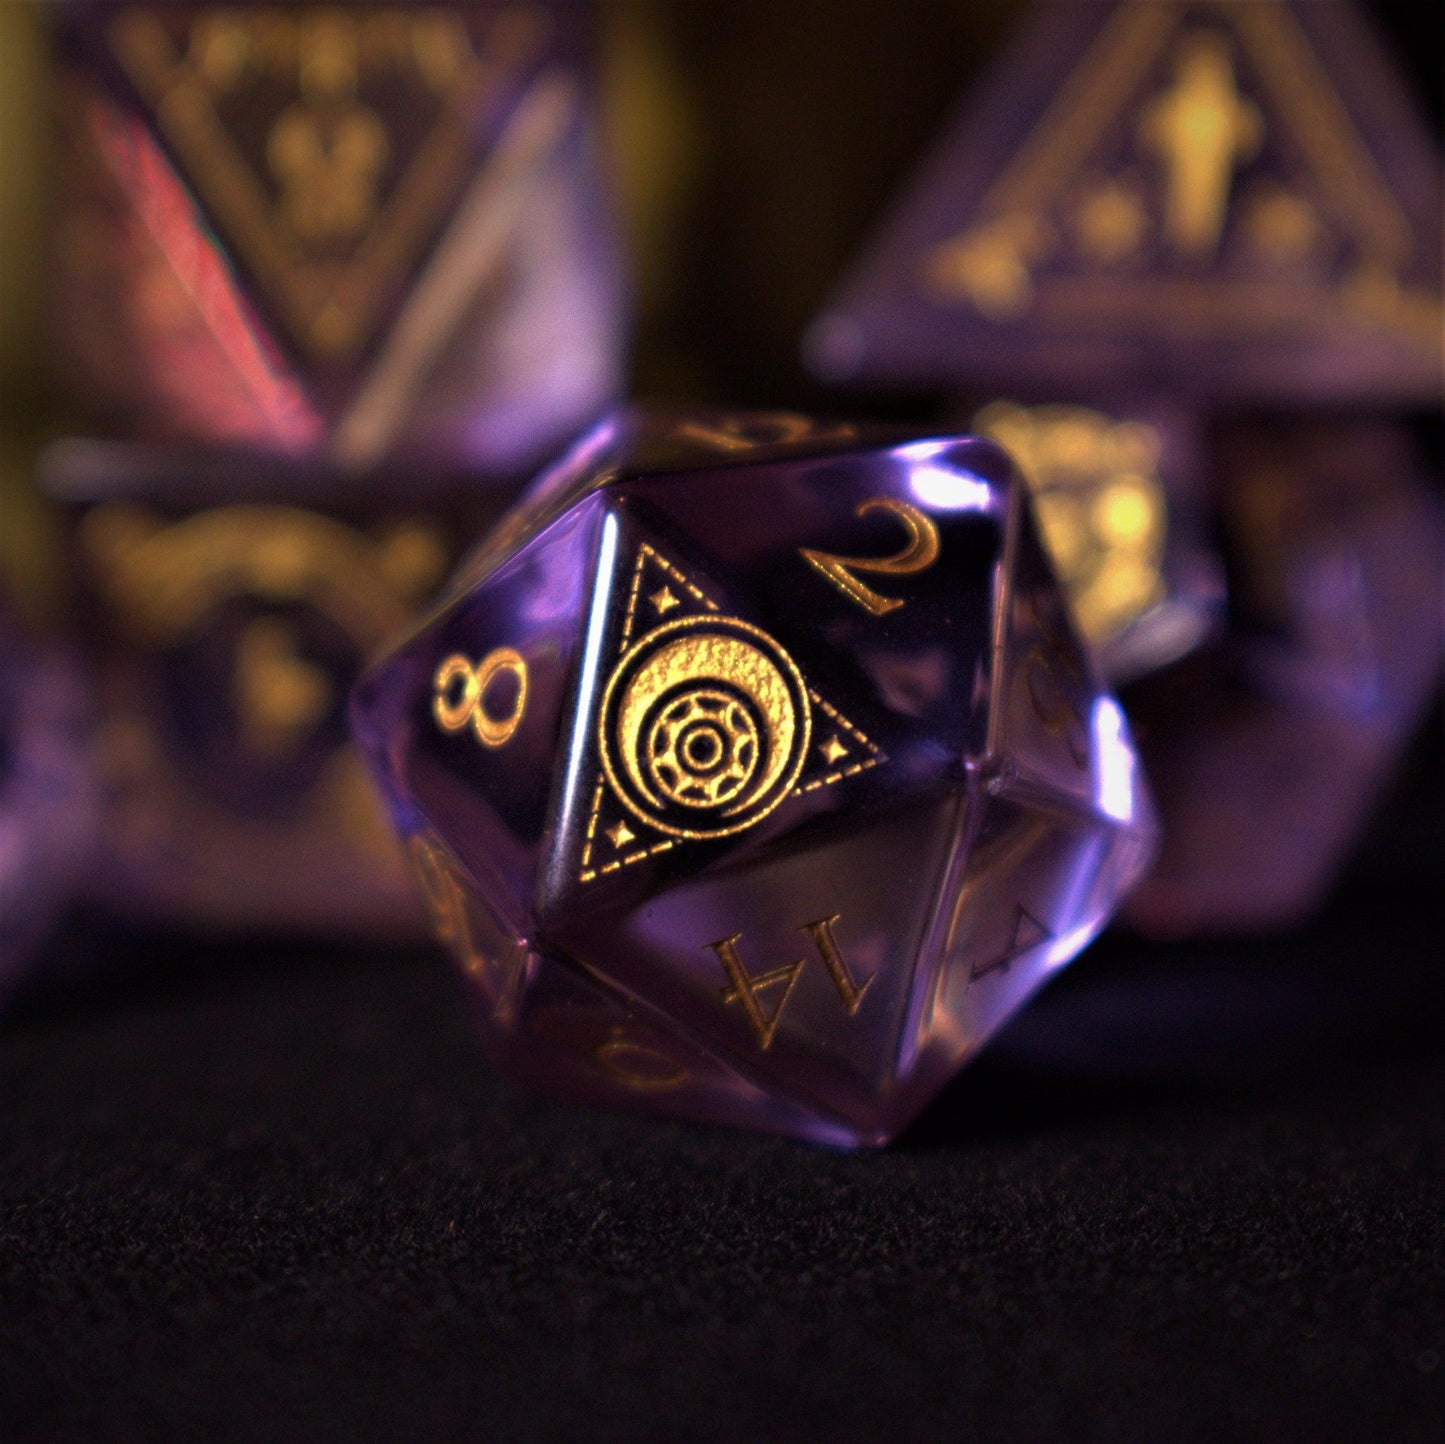 Fabled Mark Purple Glass Dice Set